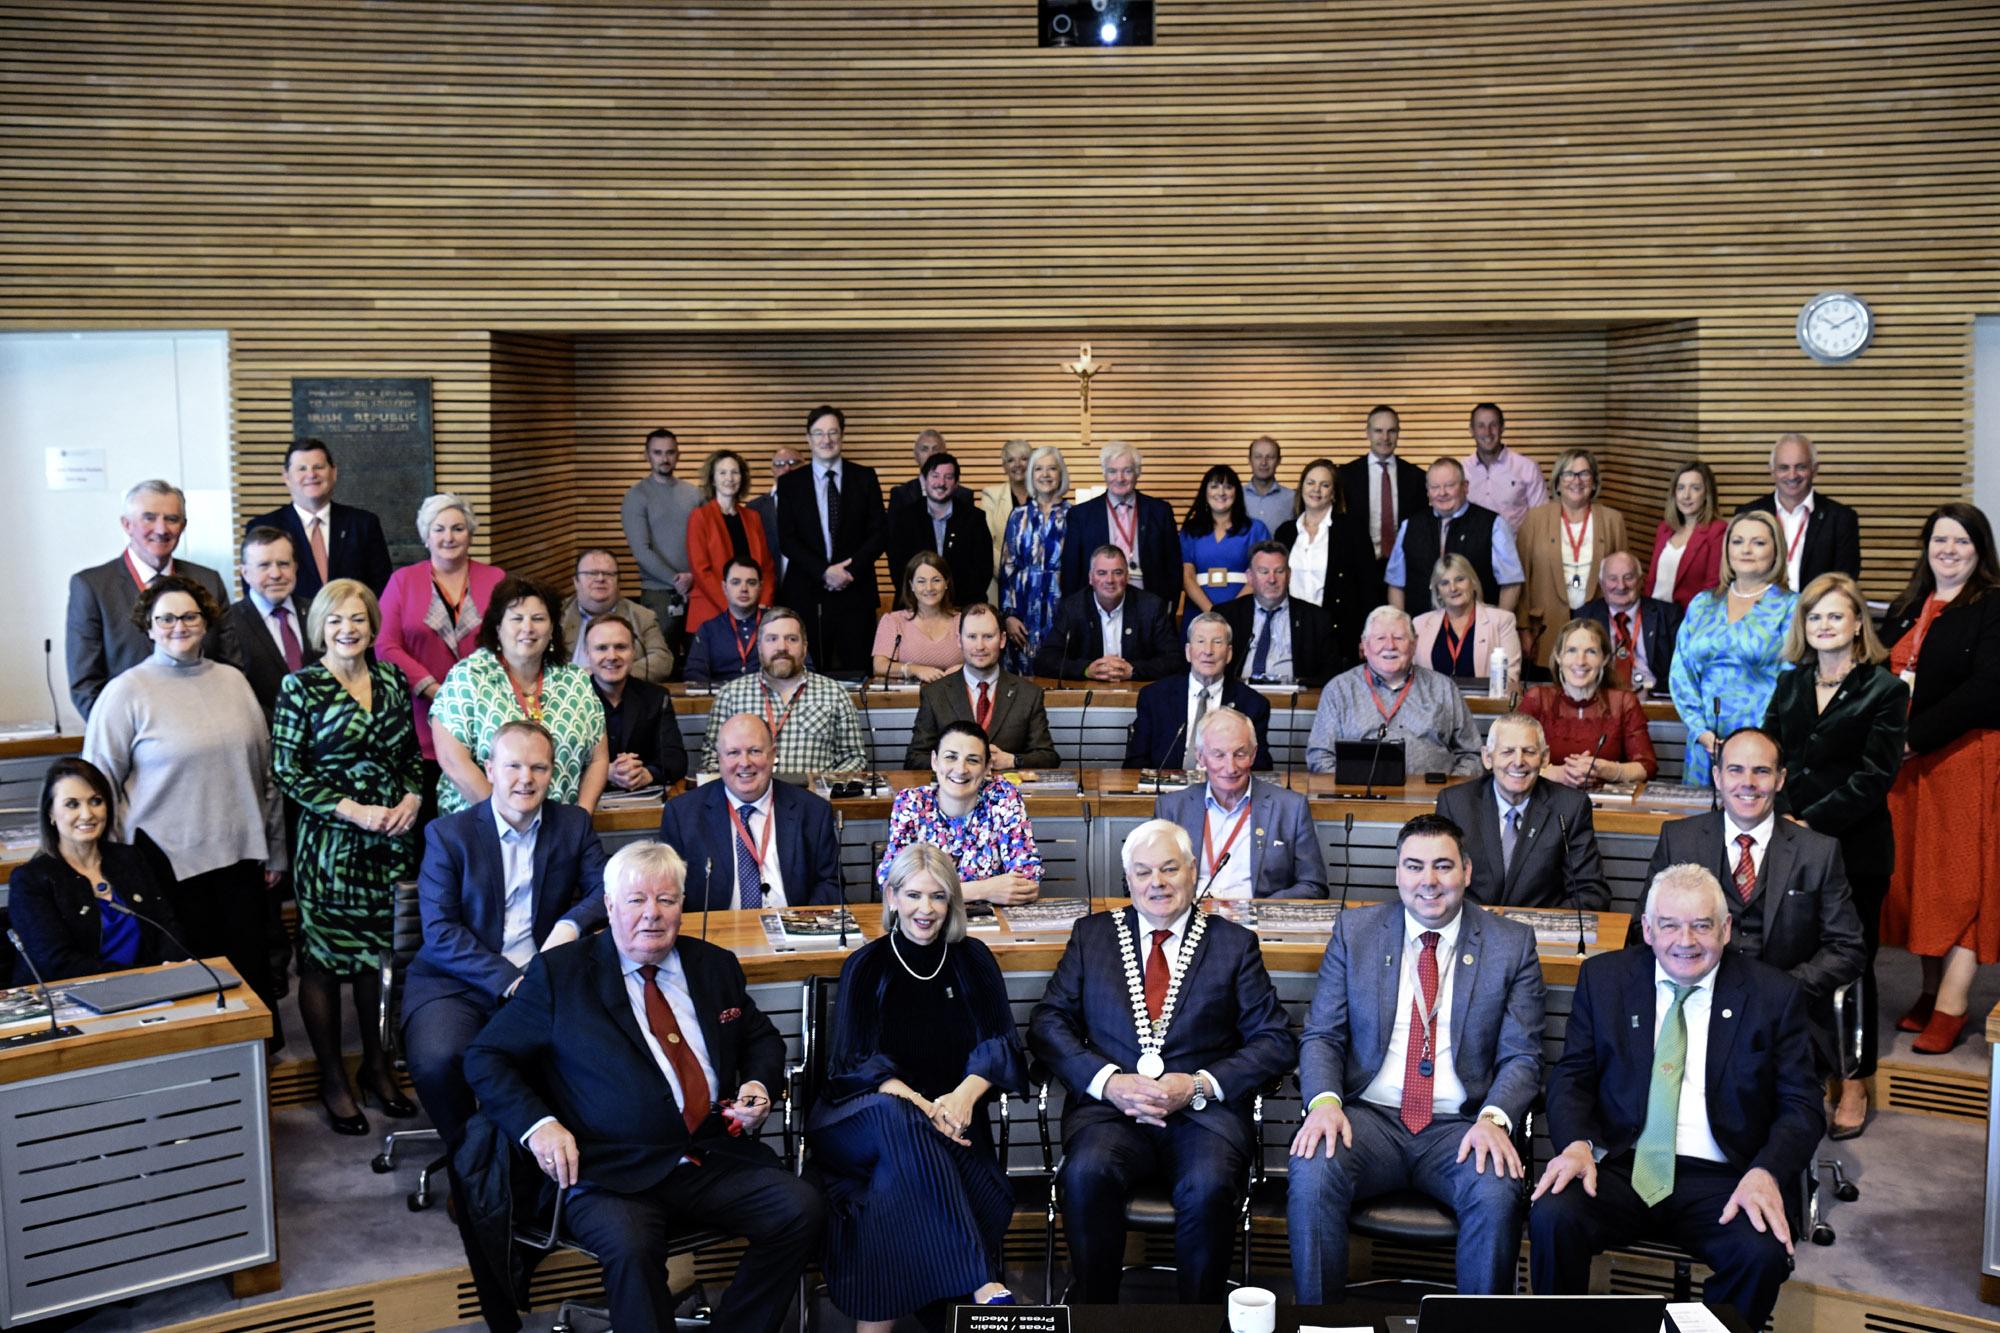 Mayor of the County Cork, Cllr. Frank O'Flynn, Chief Executive of Cork County Council, Valerie  O'Sullivan and Elected members of Cork County Council seated in the Council Chamber.